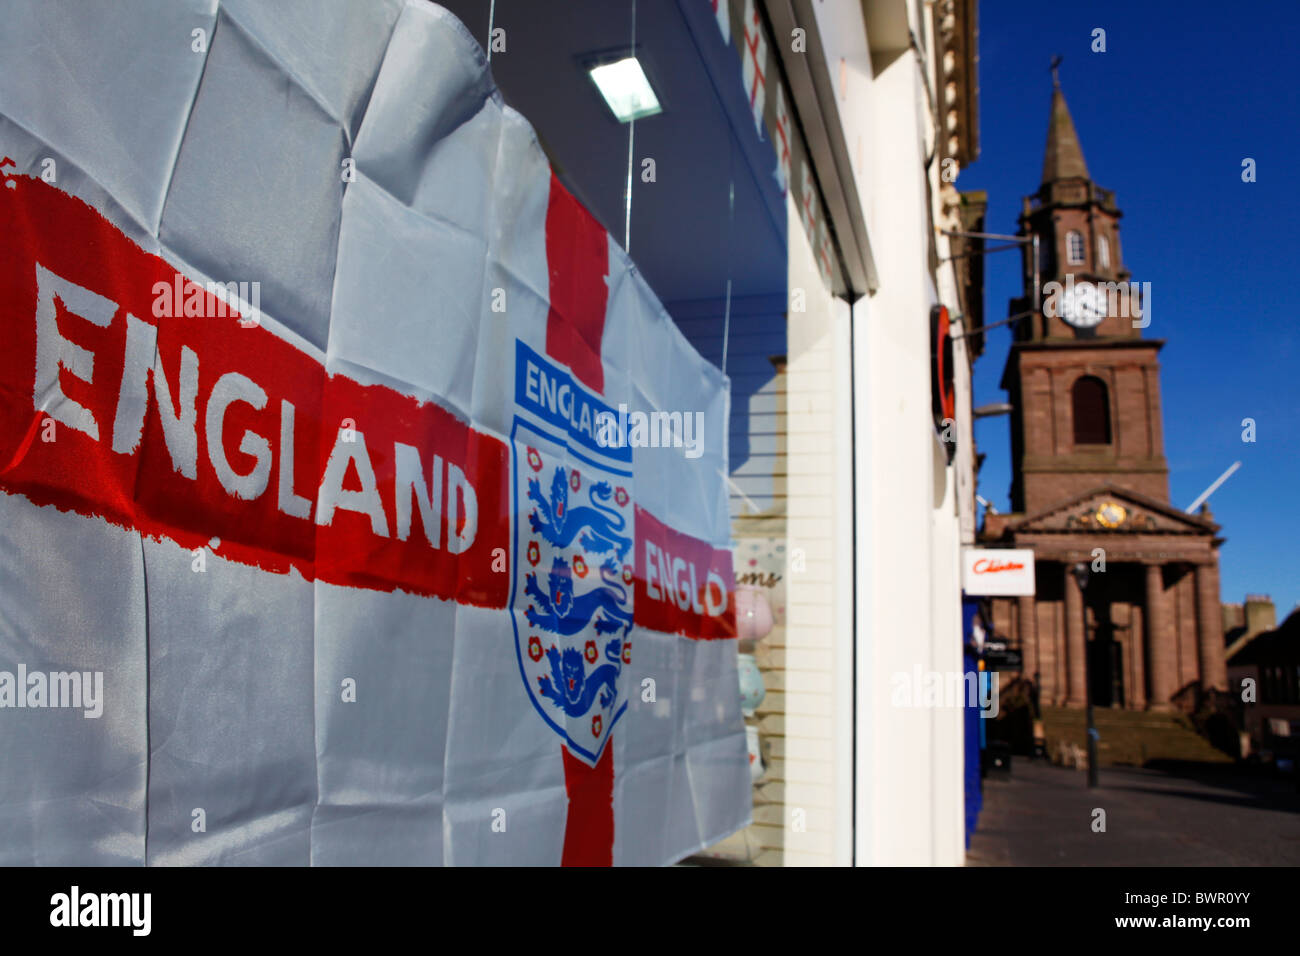 An England flag, bearing the crest of the England Football Association is displayed in a in a shop window in Berwick. Stock Photo